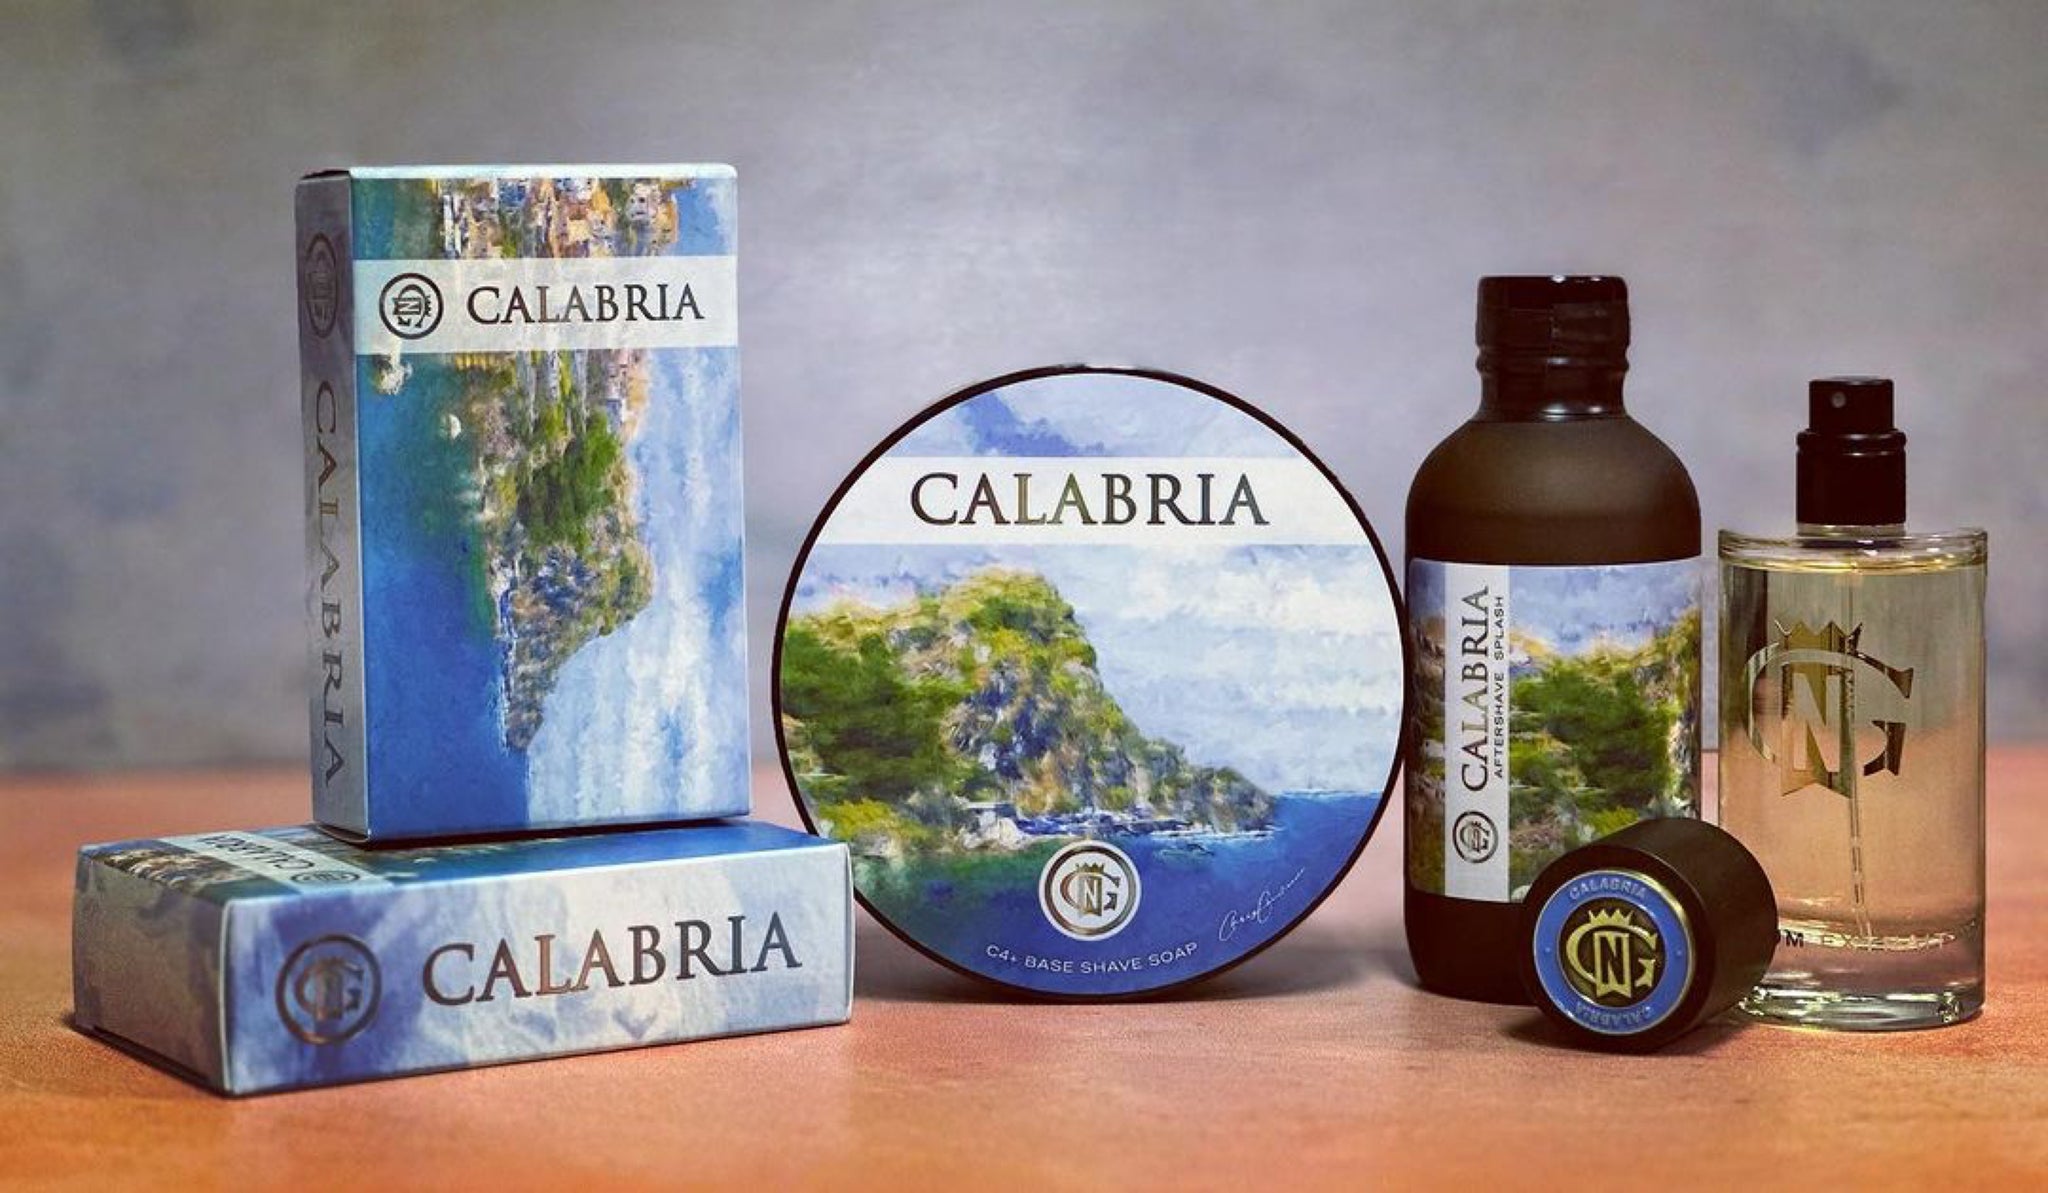 Calabria Parfum & Shave Gift Set (Trotter “Seaglass” #26 T1 Knot)